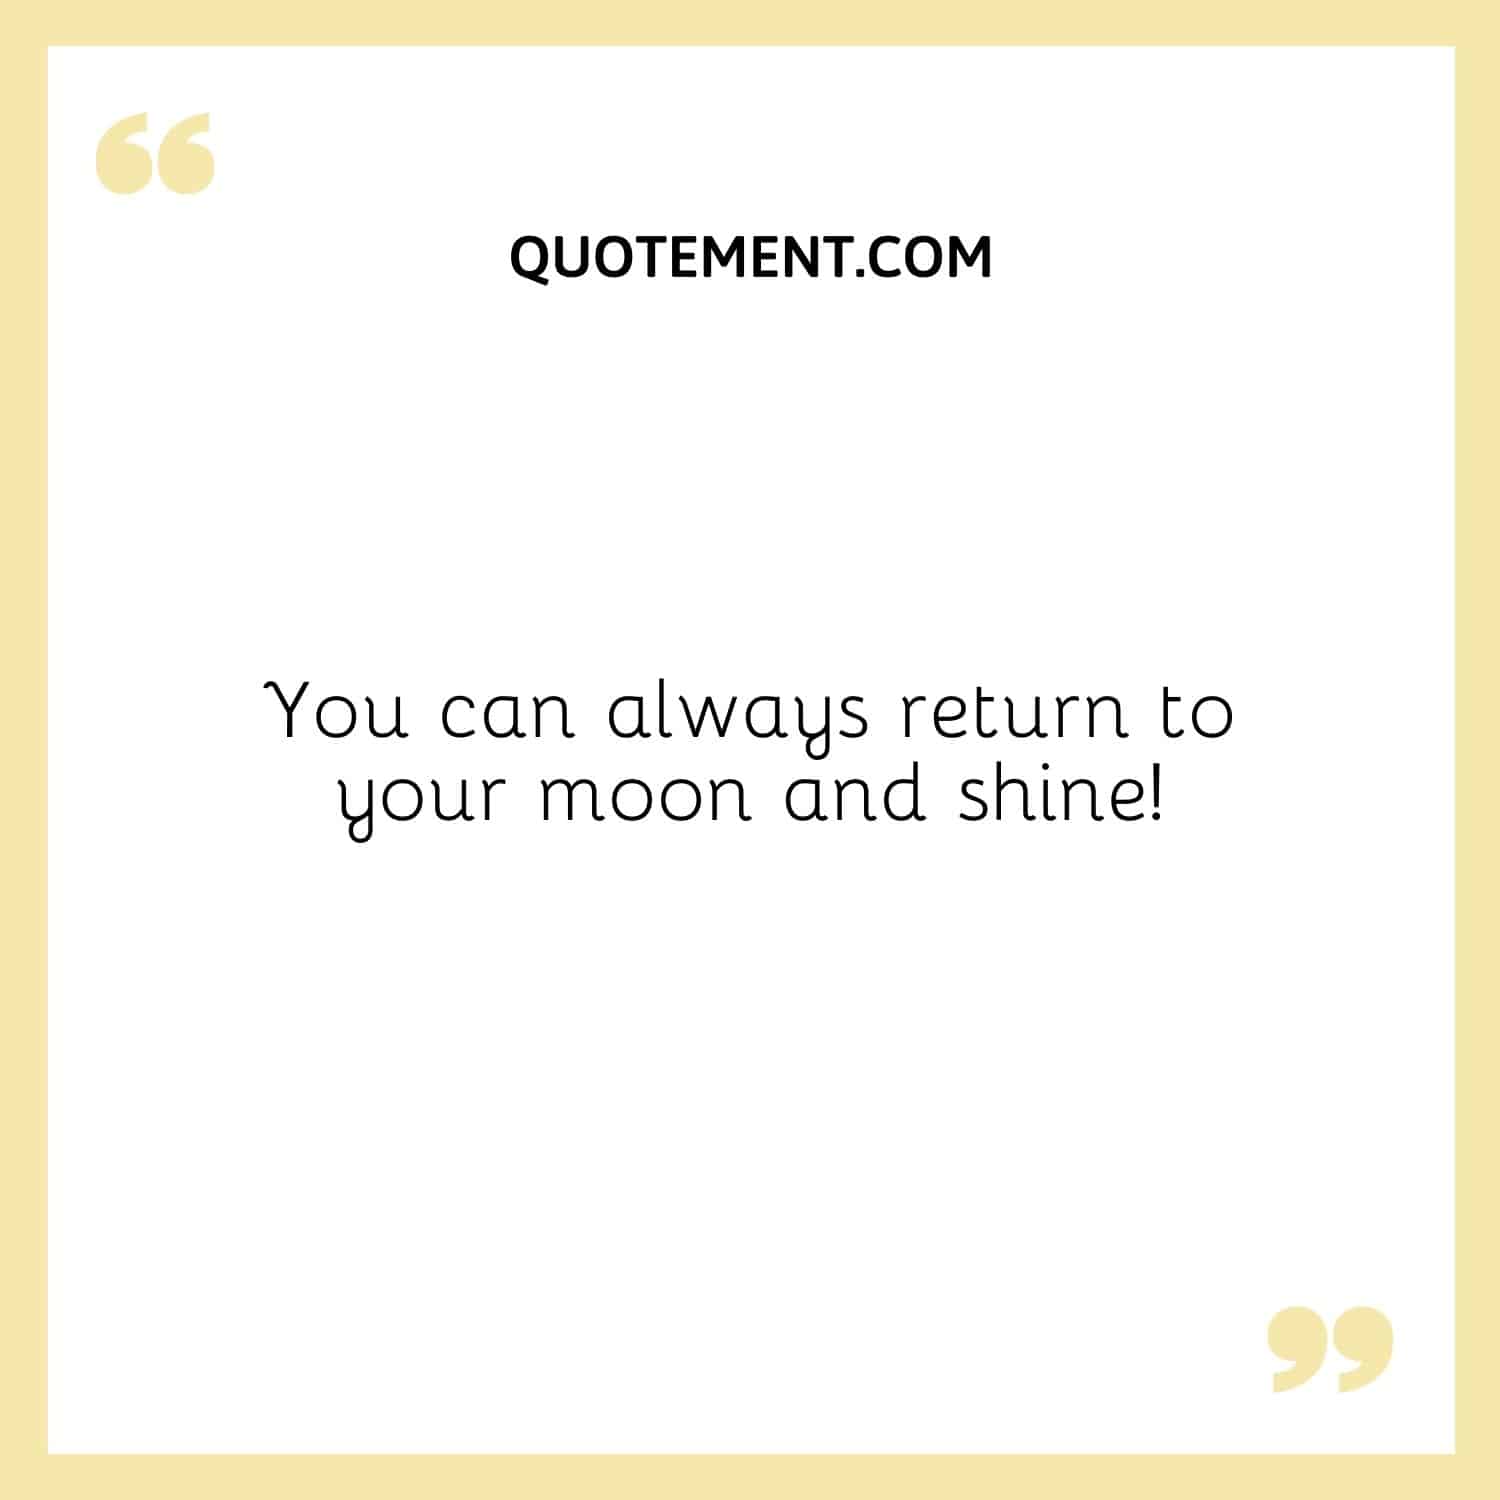 You can always return to your moon and shine!